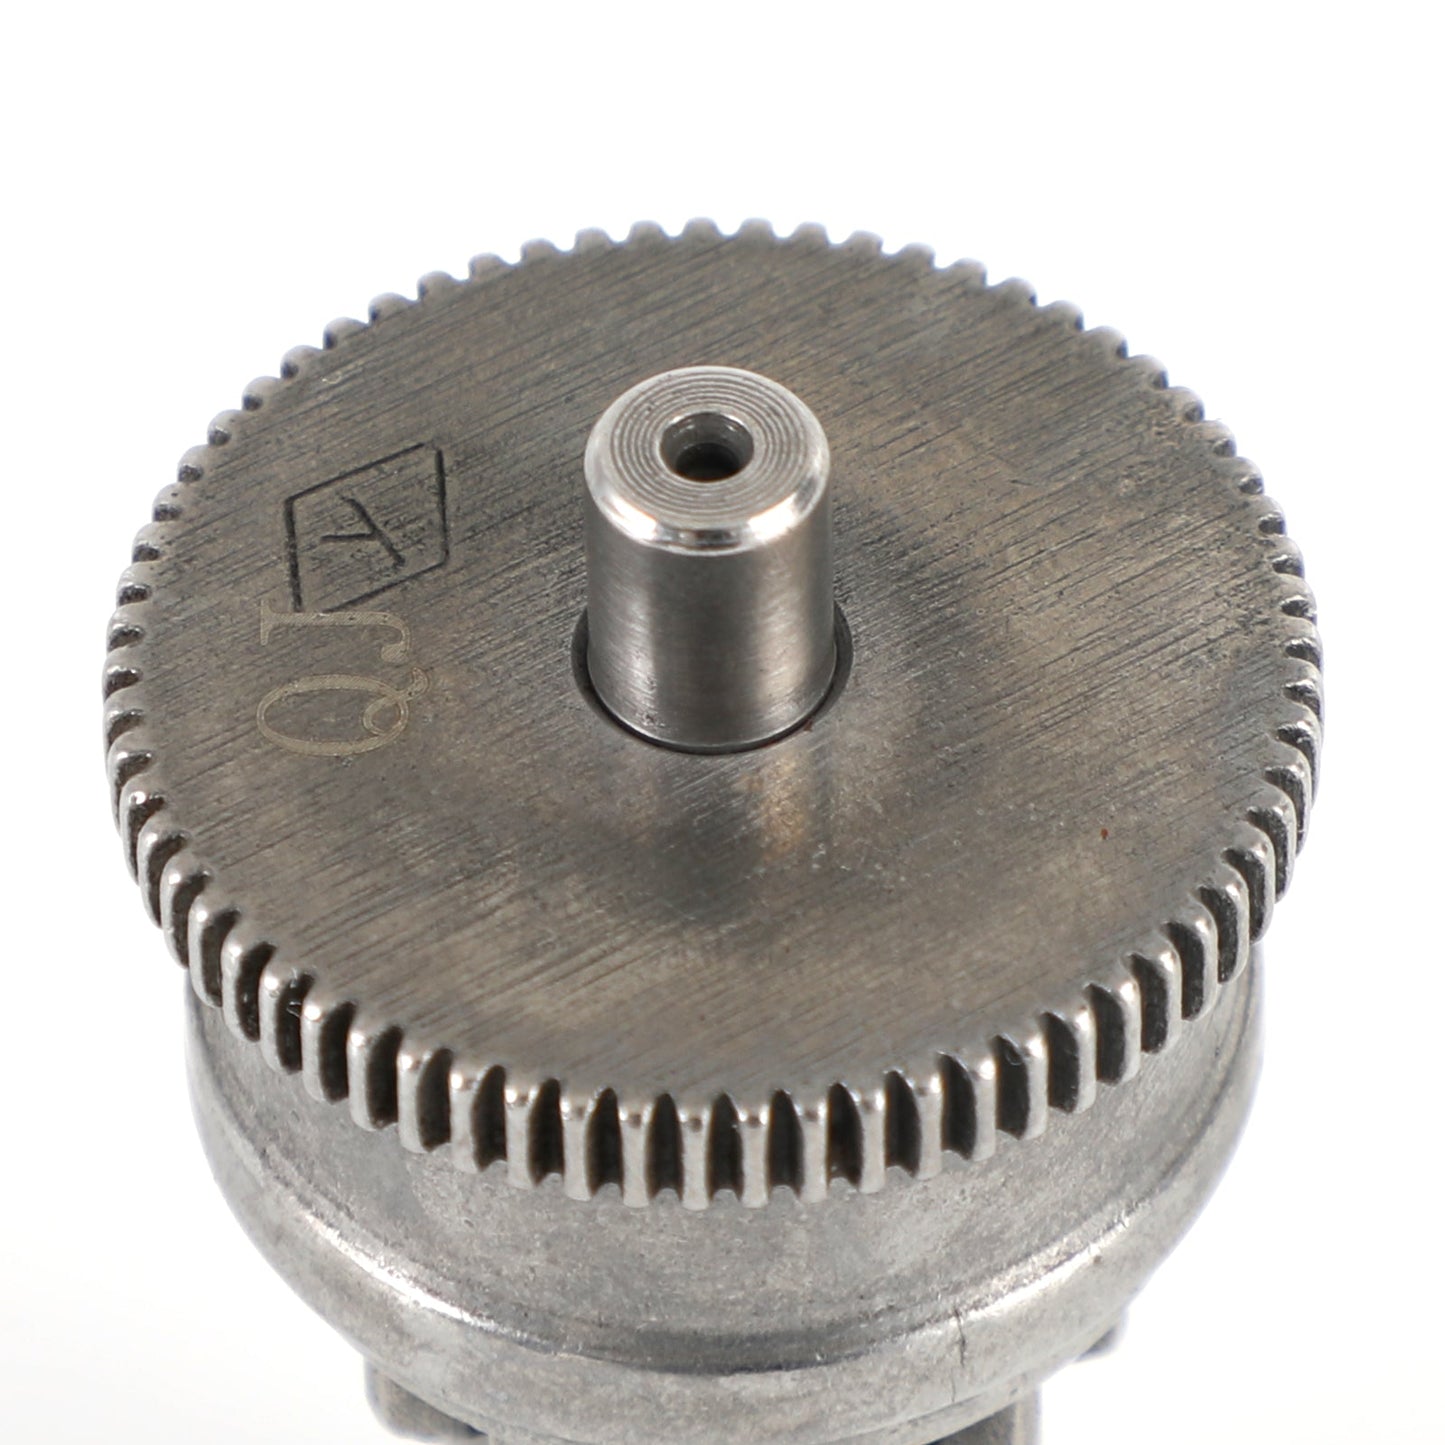 50CC 80CC STARTER DRIVE BENDIX GEAR FOR GY6 139QMB MOTORS SCOOTERS MOPED ATV